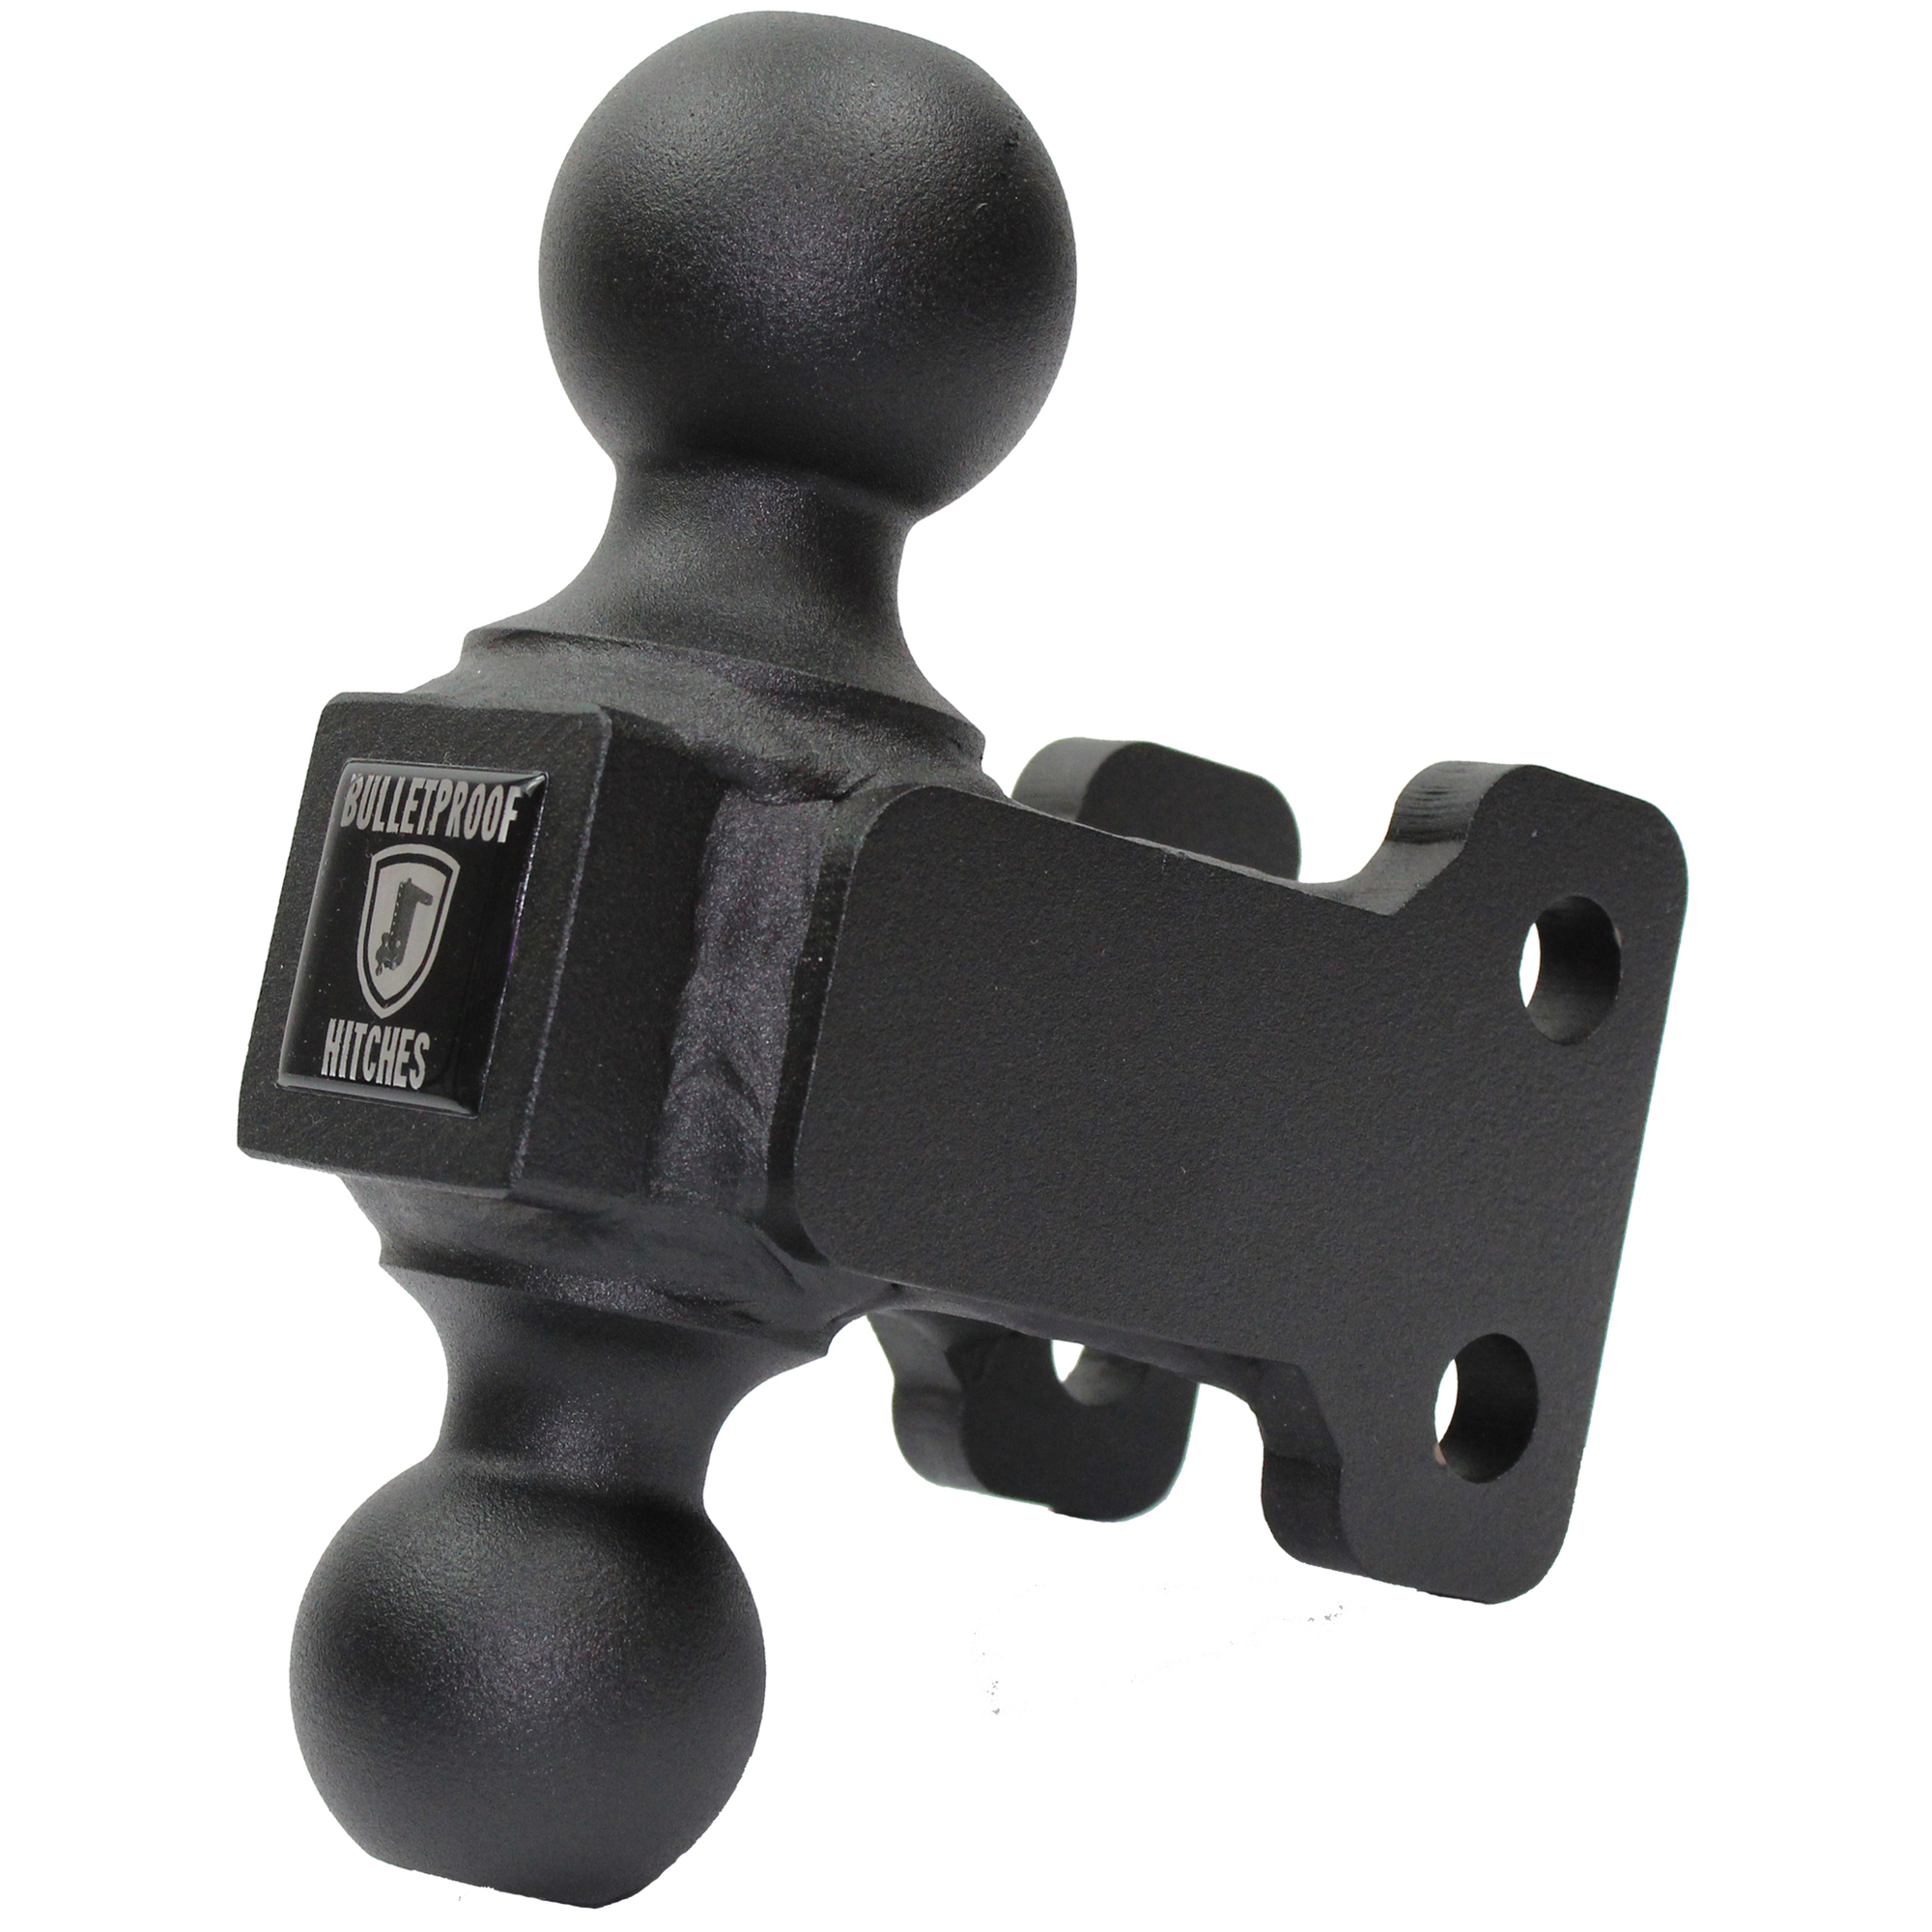 BulletProof Hitches, MEDIUM DUTY 2Inch 2 5/16Inch DUAL BALL, Fits Receiver Size Multiple in, Model MDDUALBALL